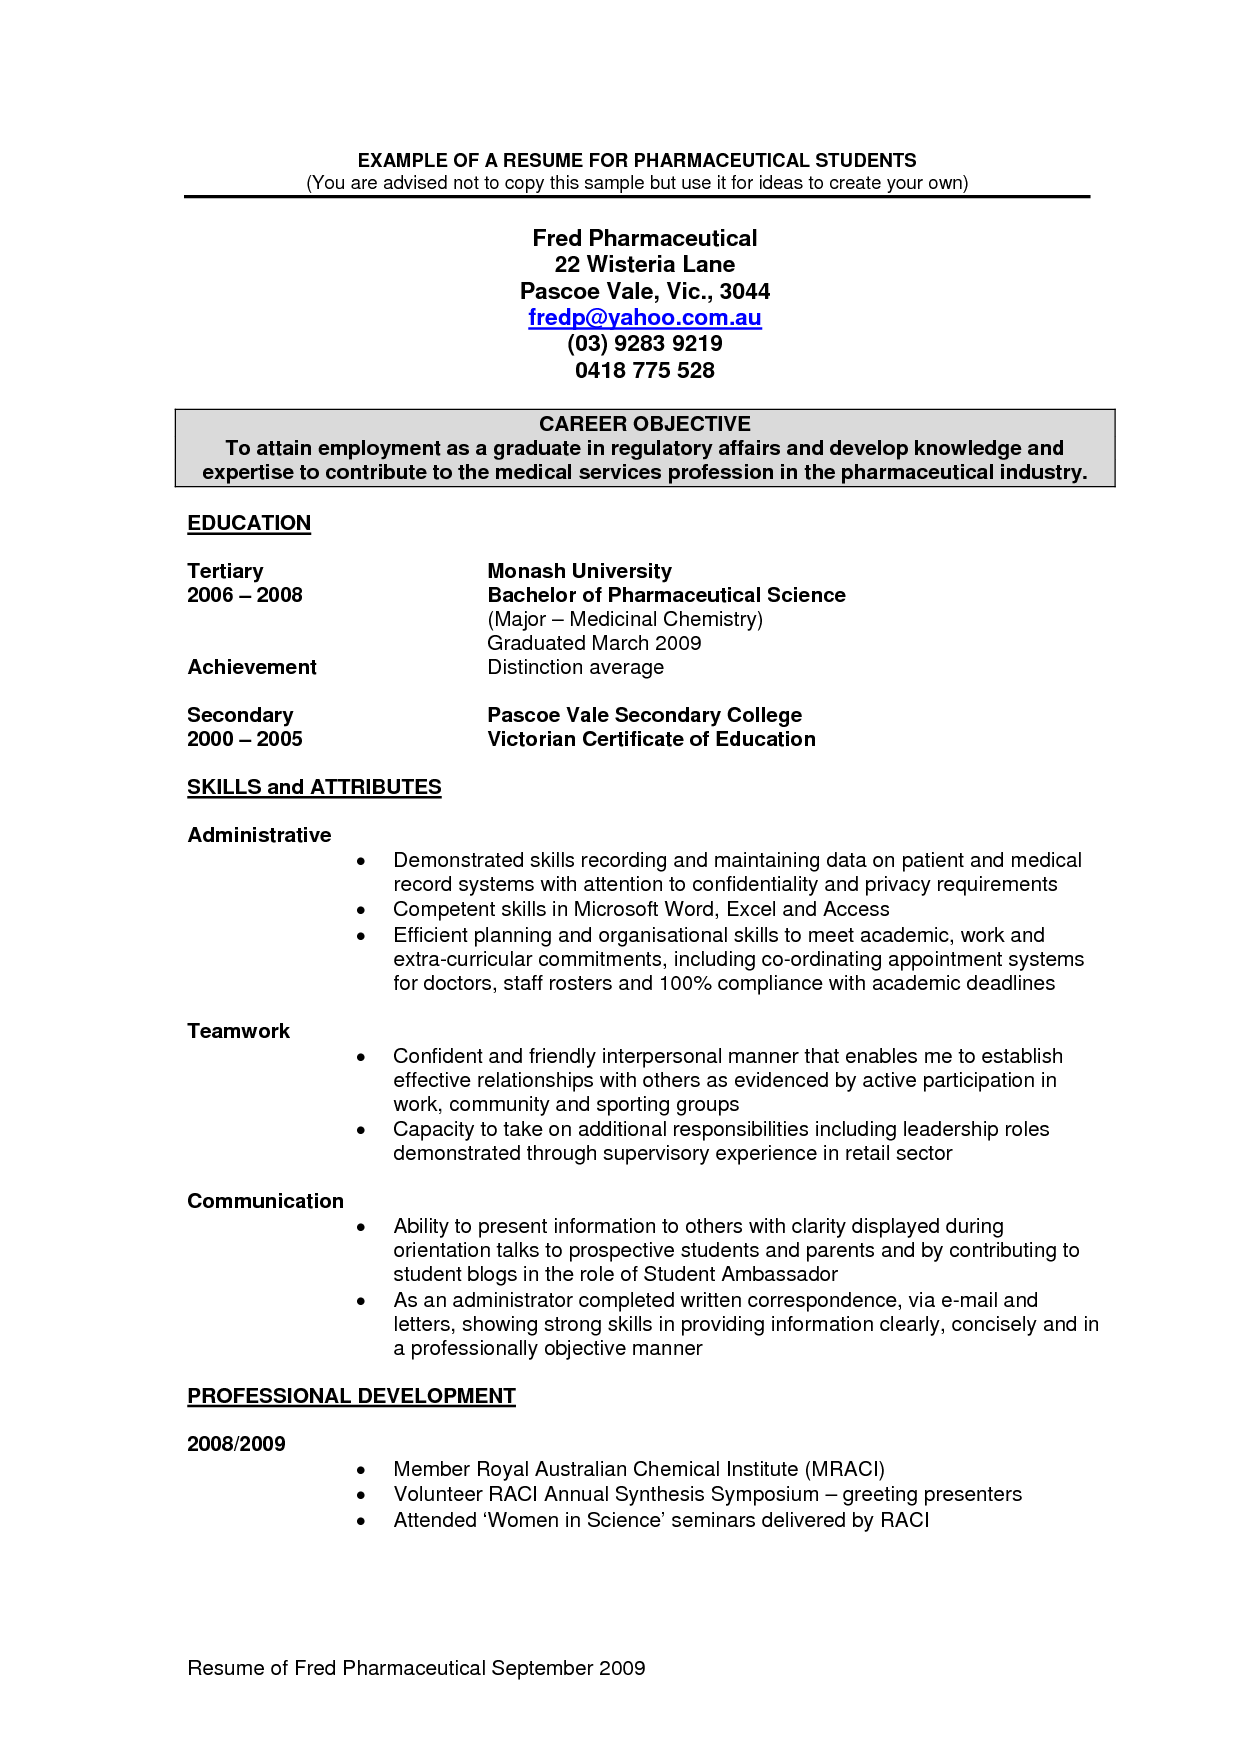 Resume Examples Kitchen Hand 